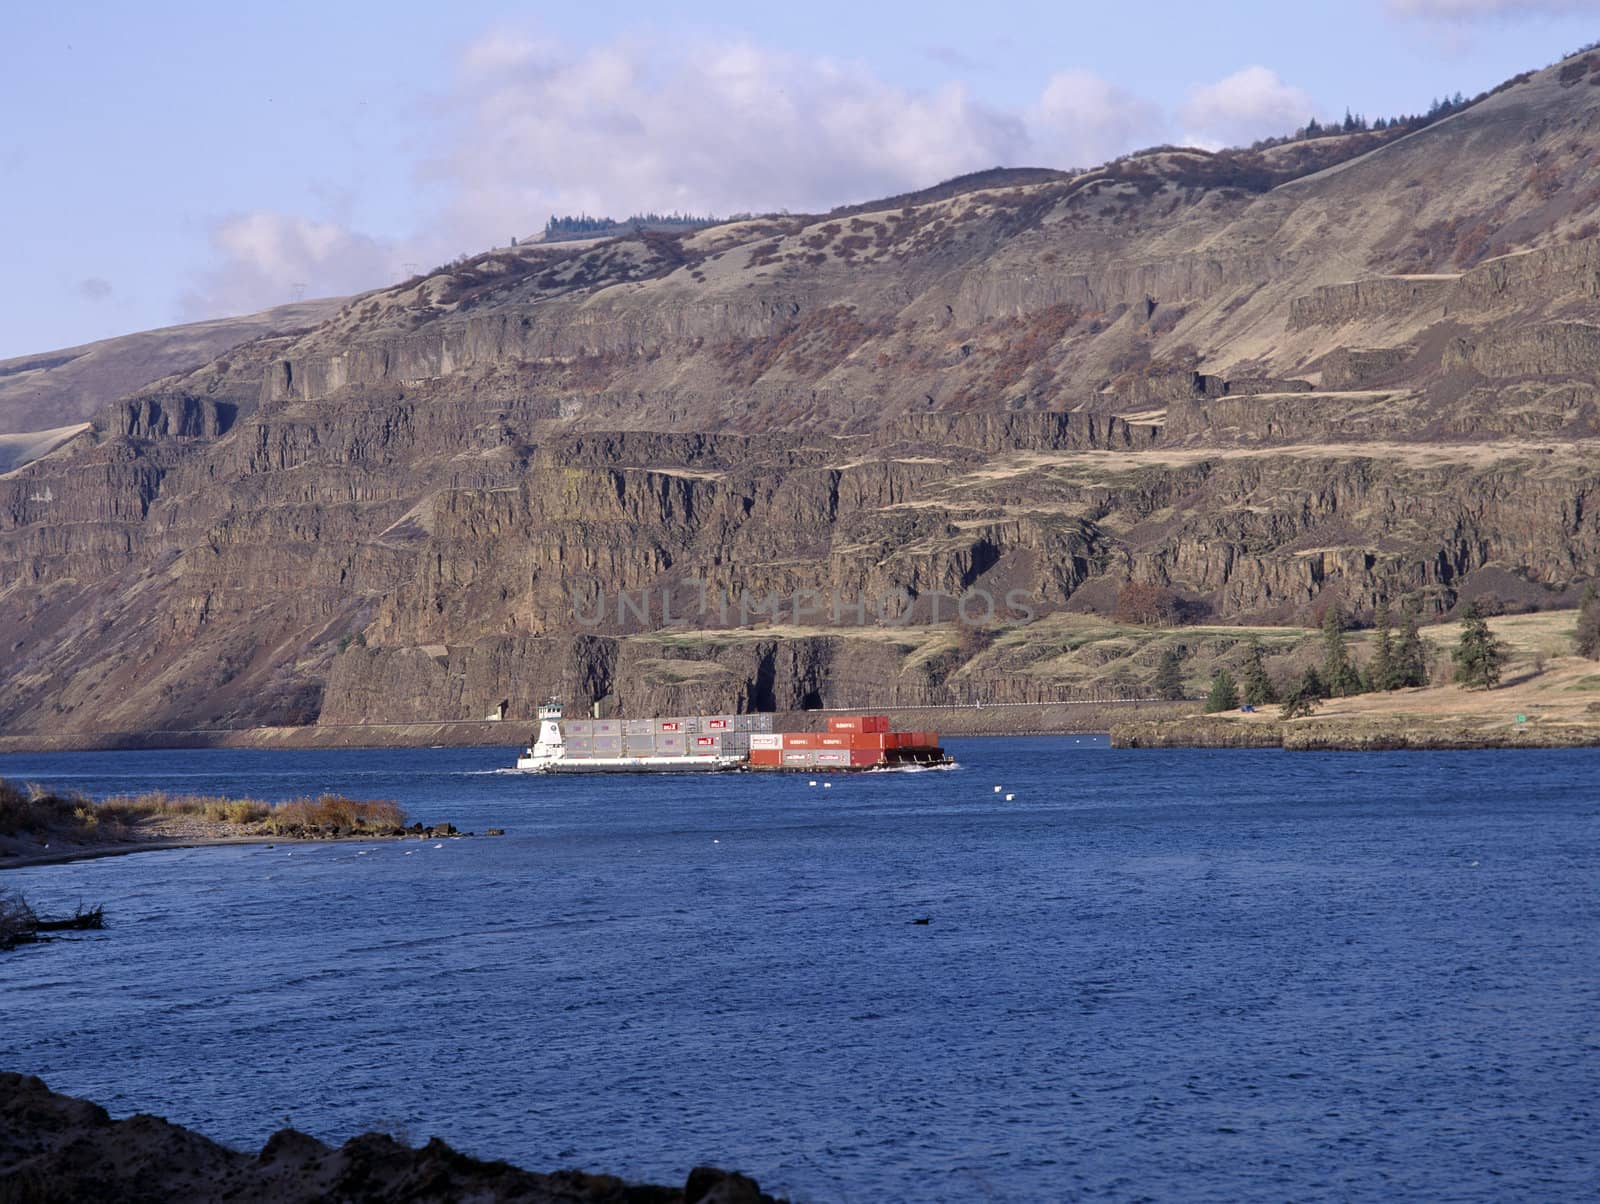 Red barge moving a load down the river on the Columbia River, Oregon